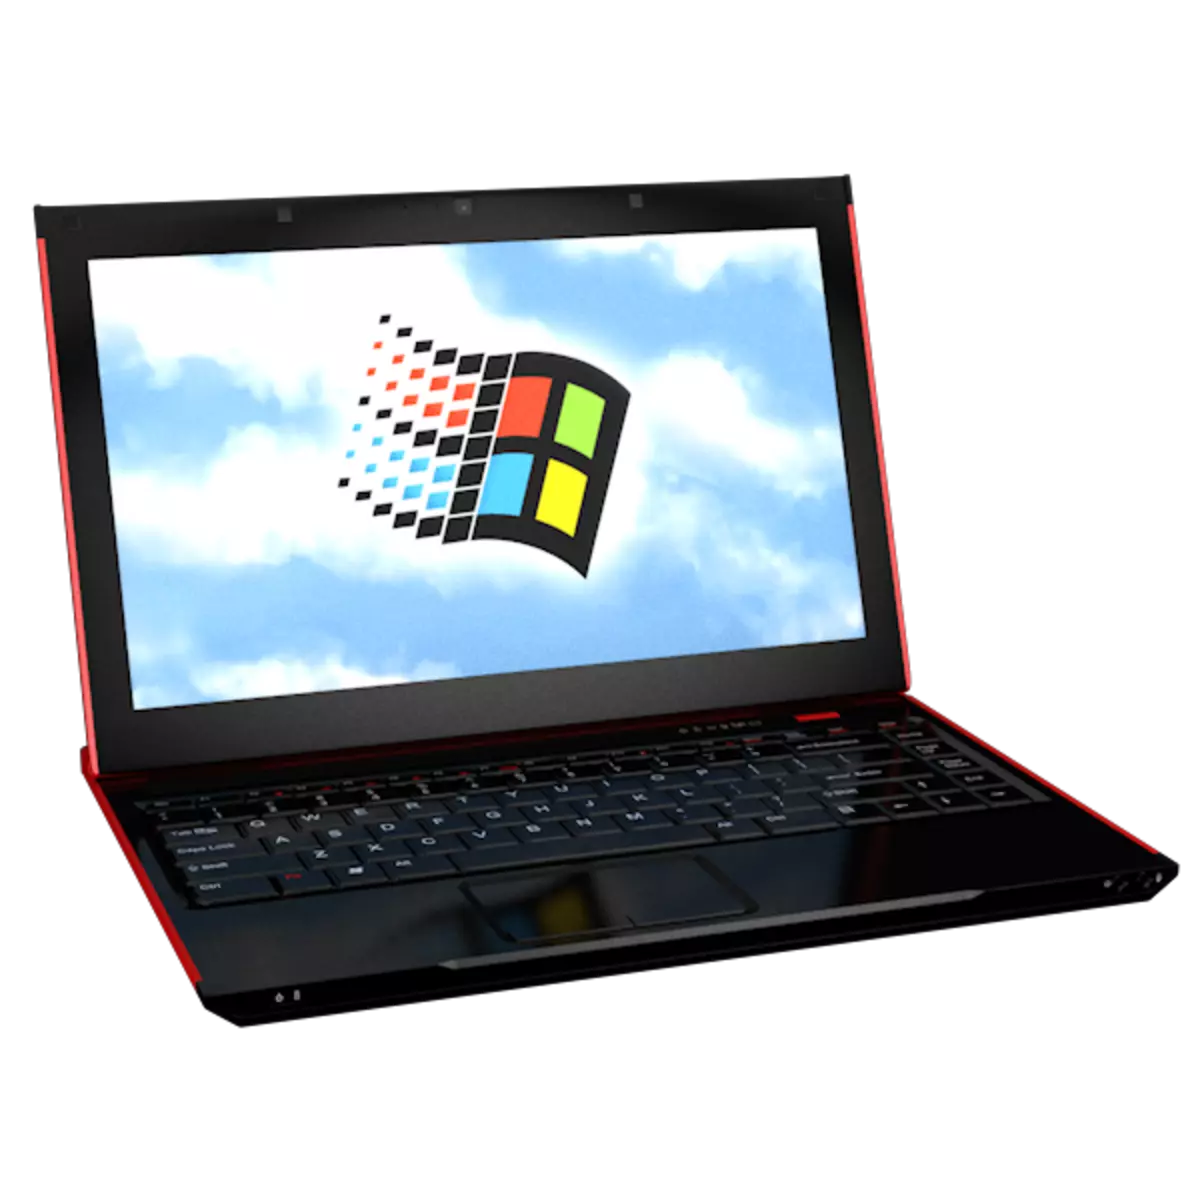 How to reinstall windows on a laptop